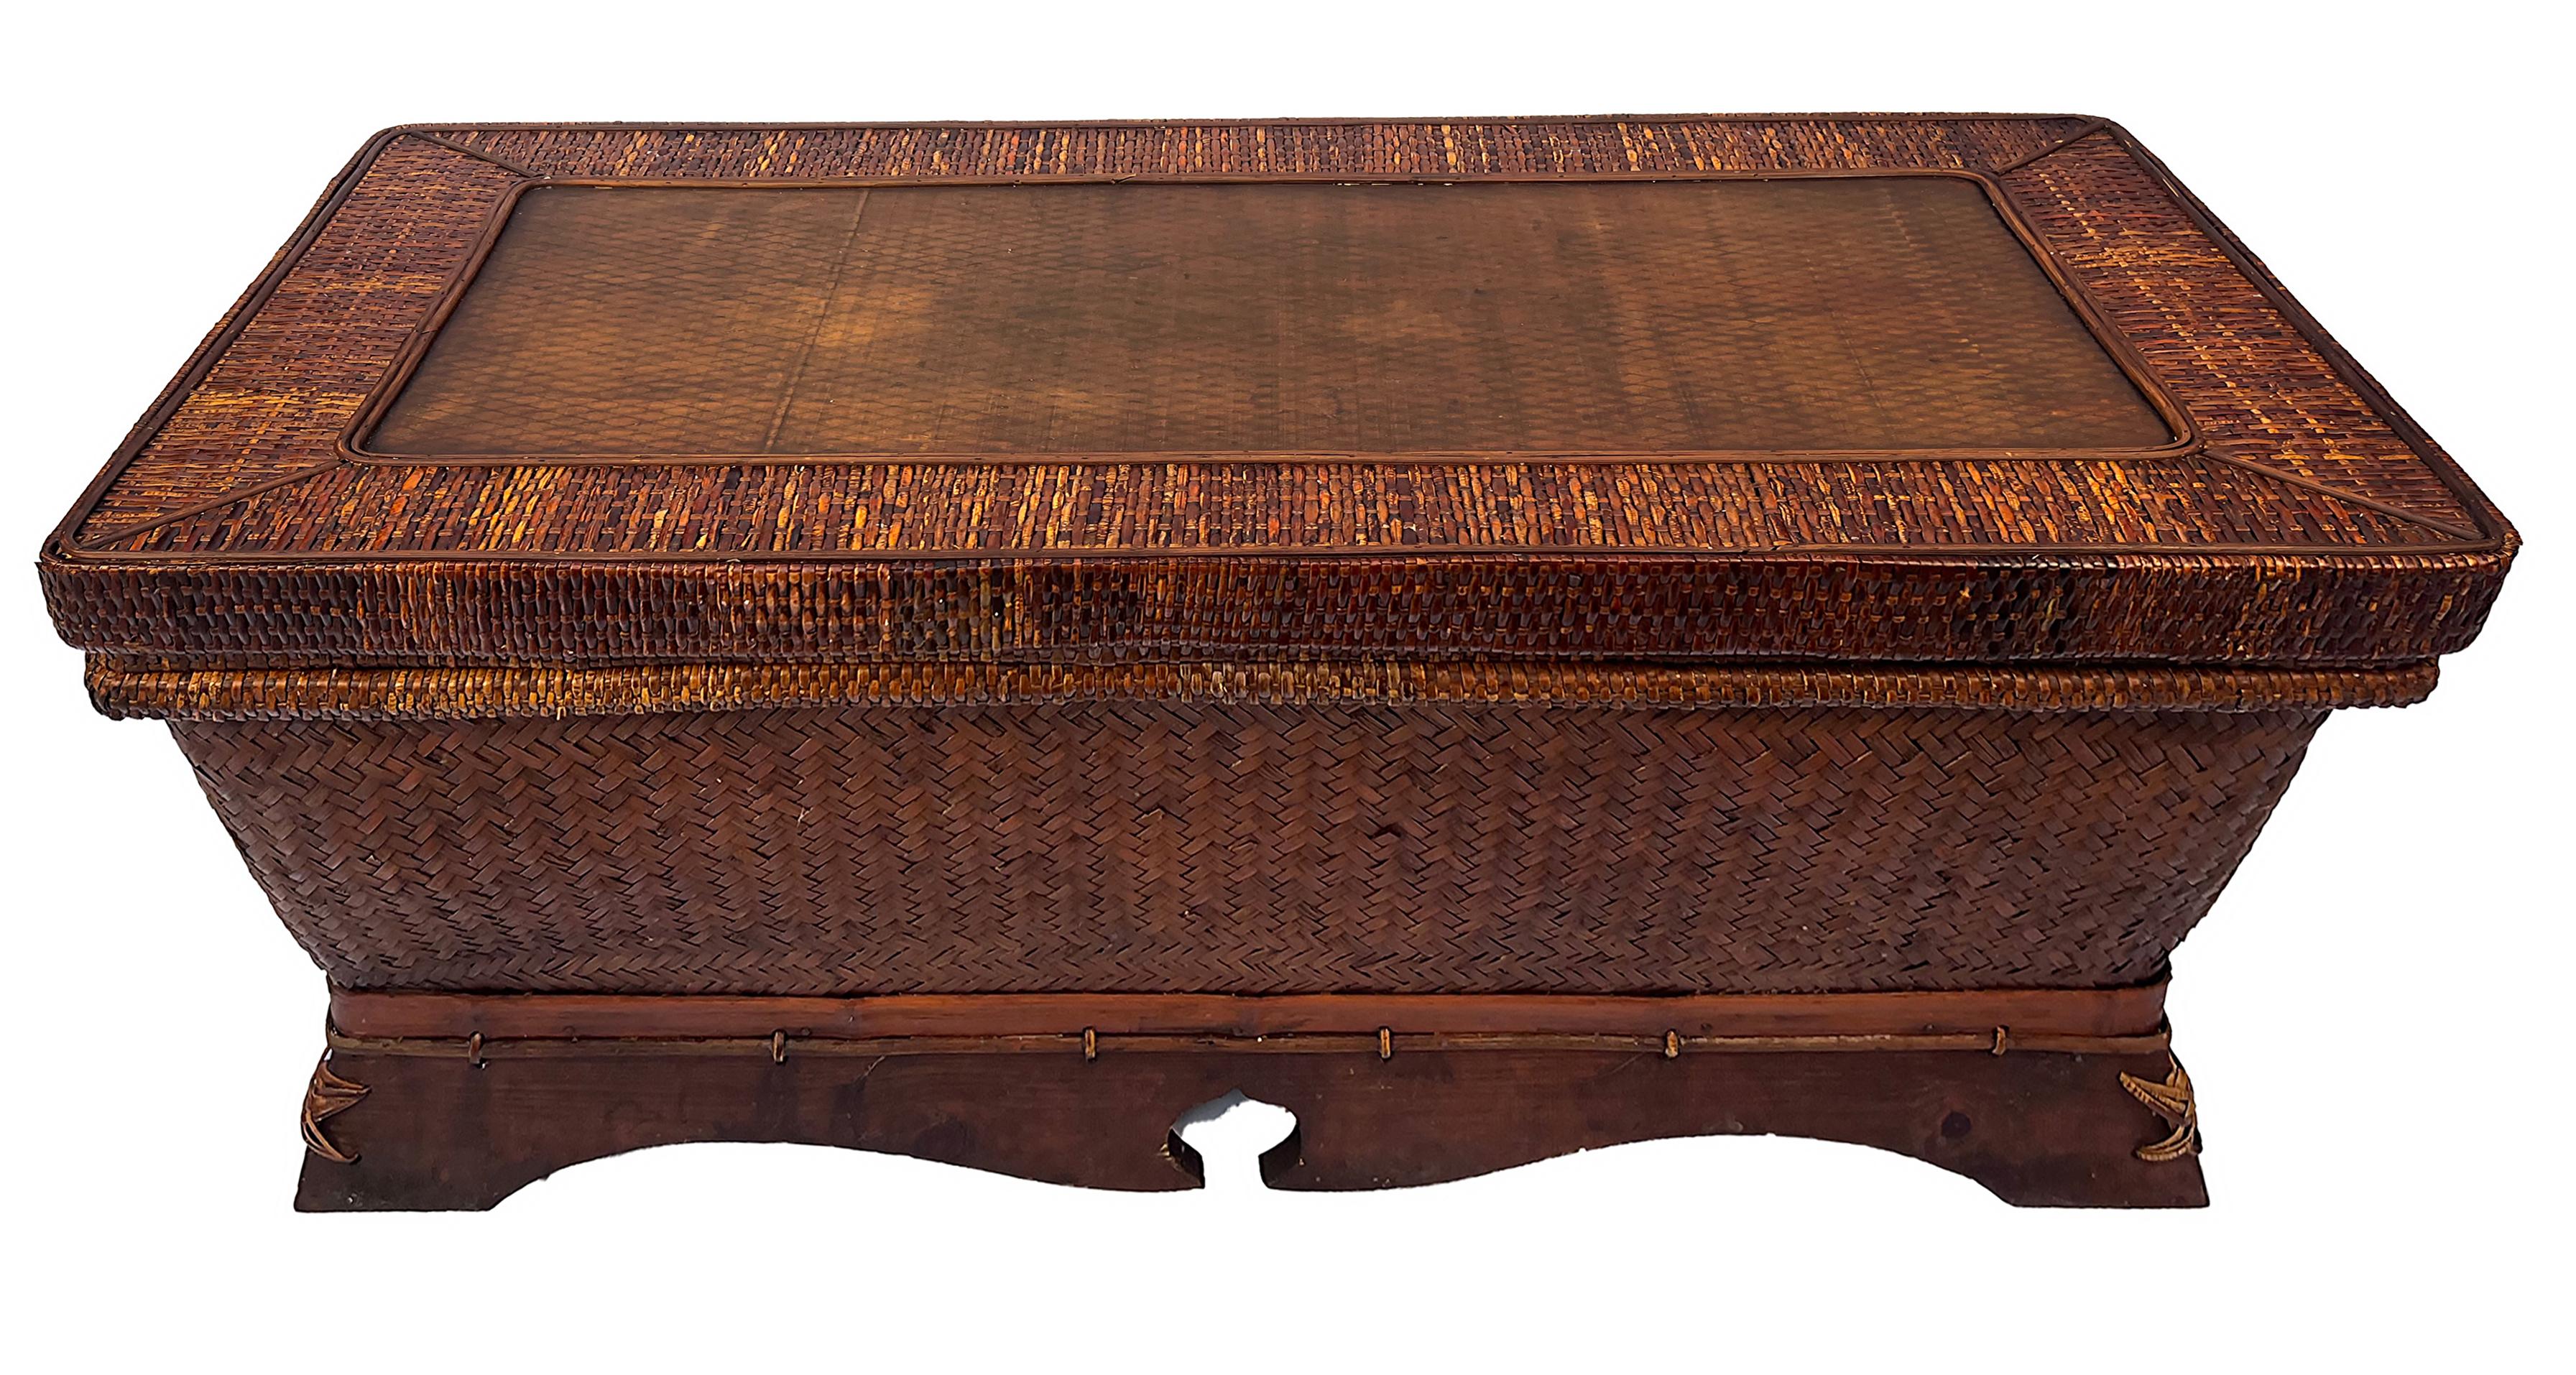 Antique Chinese Woven Rattan Chest Trunk or Coffee Table  In Good Condition For Sale In Miami, FL